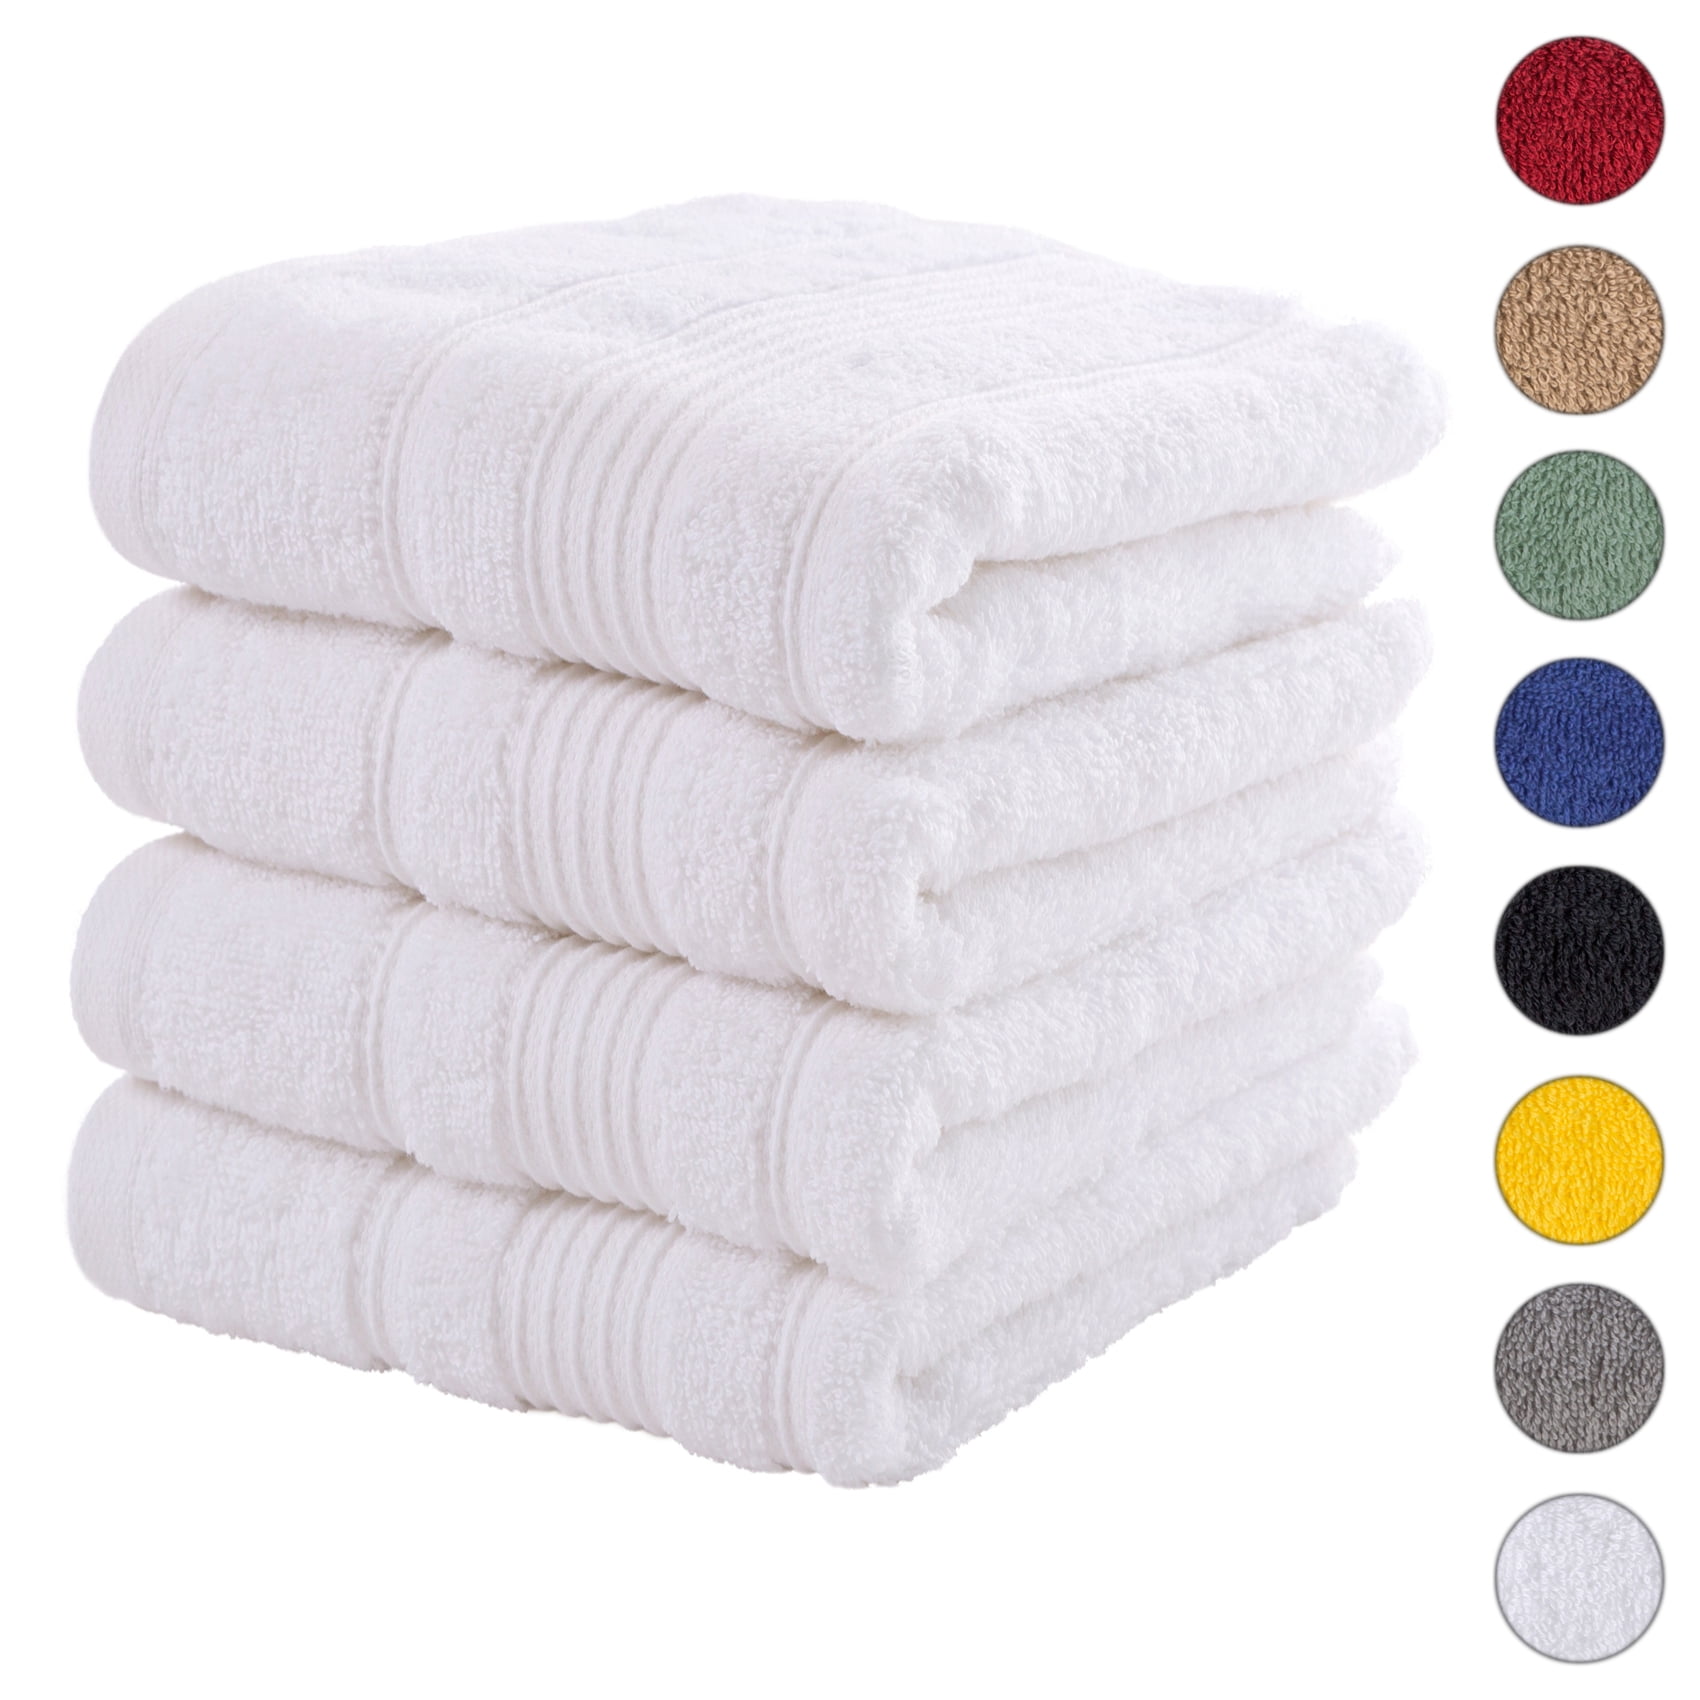 Authentic Hotel and Spa White Turkish Cotton Scrollwork Embroidered Hand  Towel - On Sale - Bed Bath & Beyond - 21139269